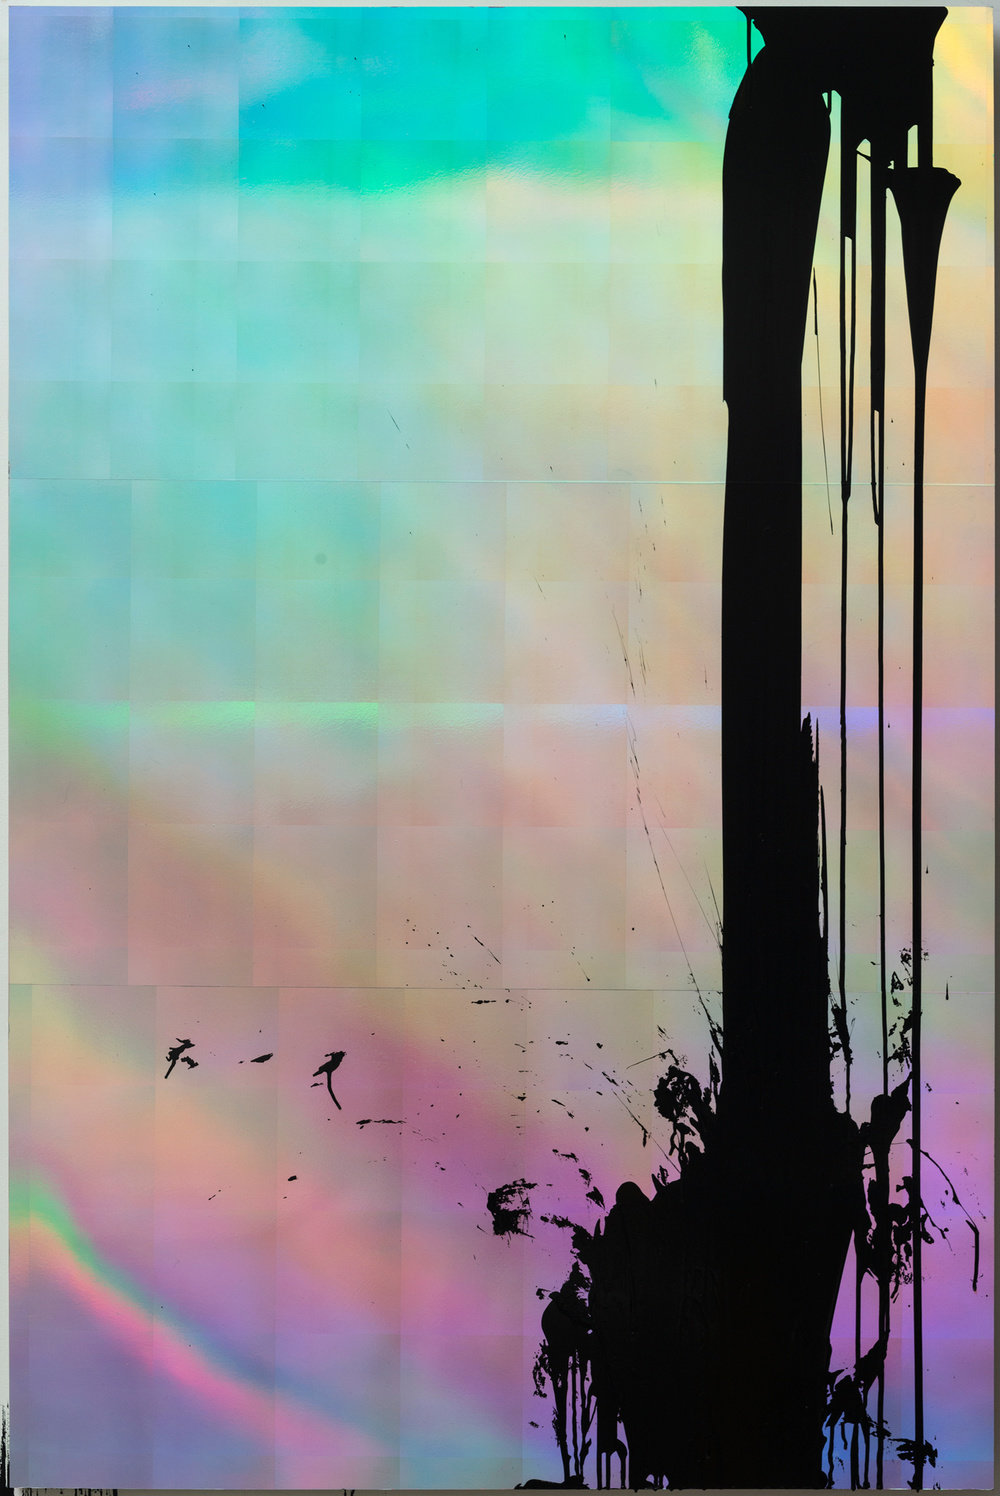 Strother, i got a barnett newman all over my holograms (view 1), 2014, hologram mylar, mounted on acrylic sheet, poly glue, water based vinyl paint, 48 x 72 in. 121.92 x 182.88 cm